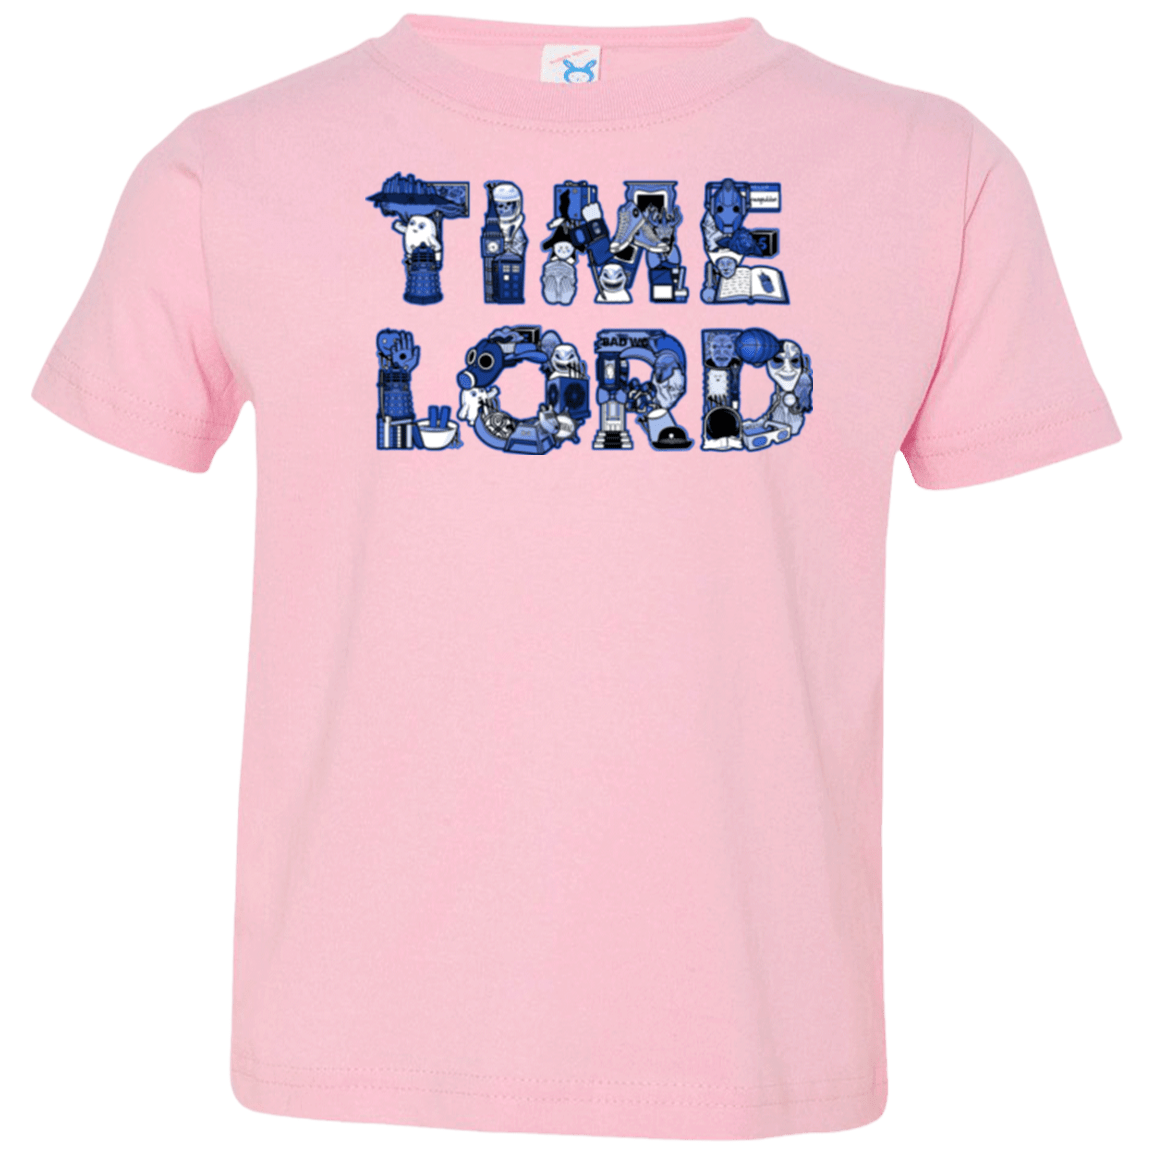 T-Shirts Pink / 2T Timelord Toddler Premium T-Shirt